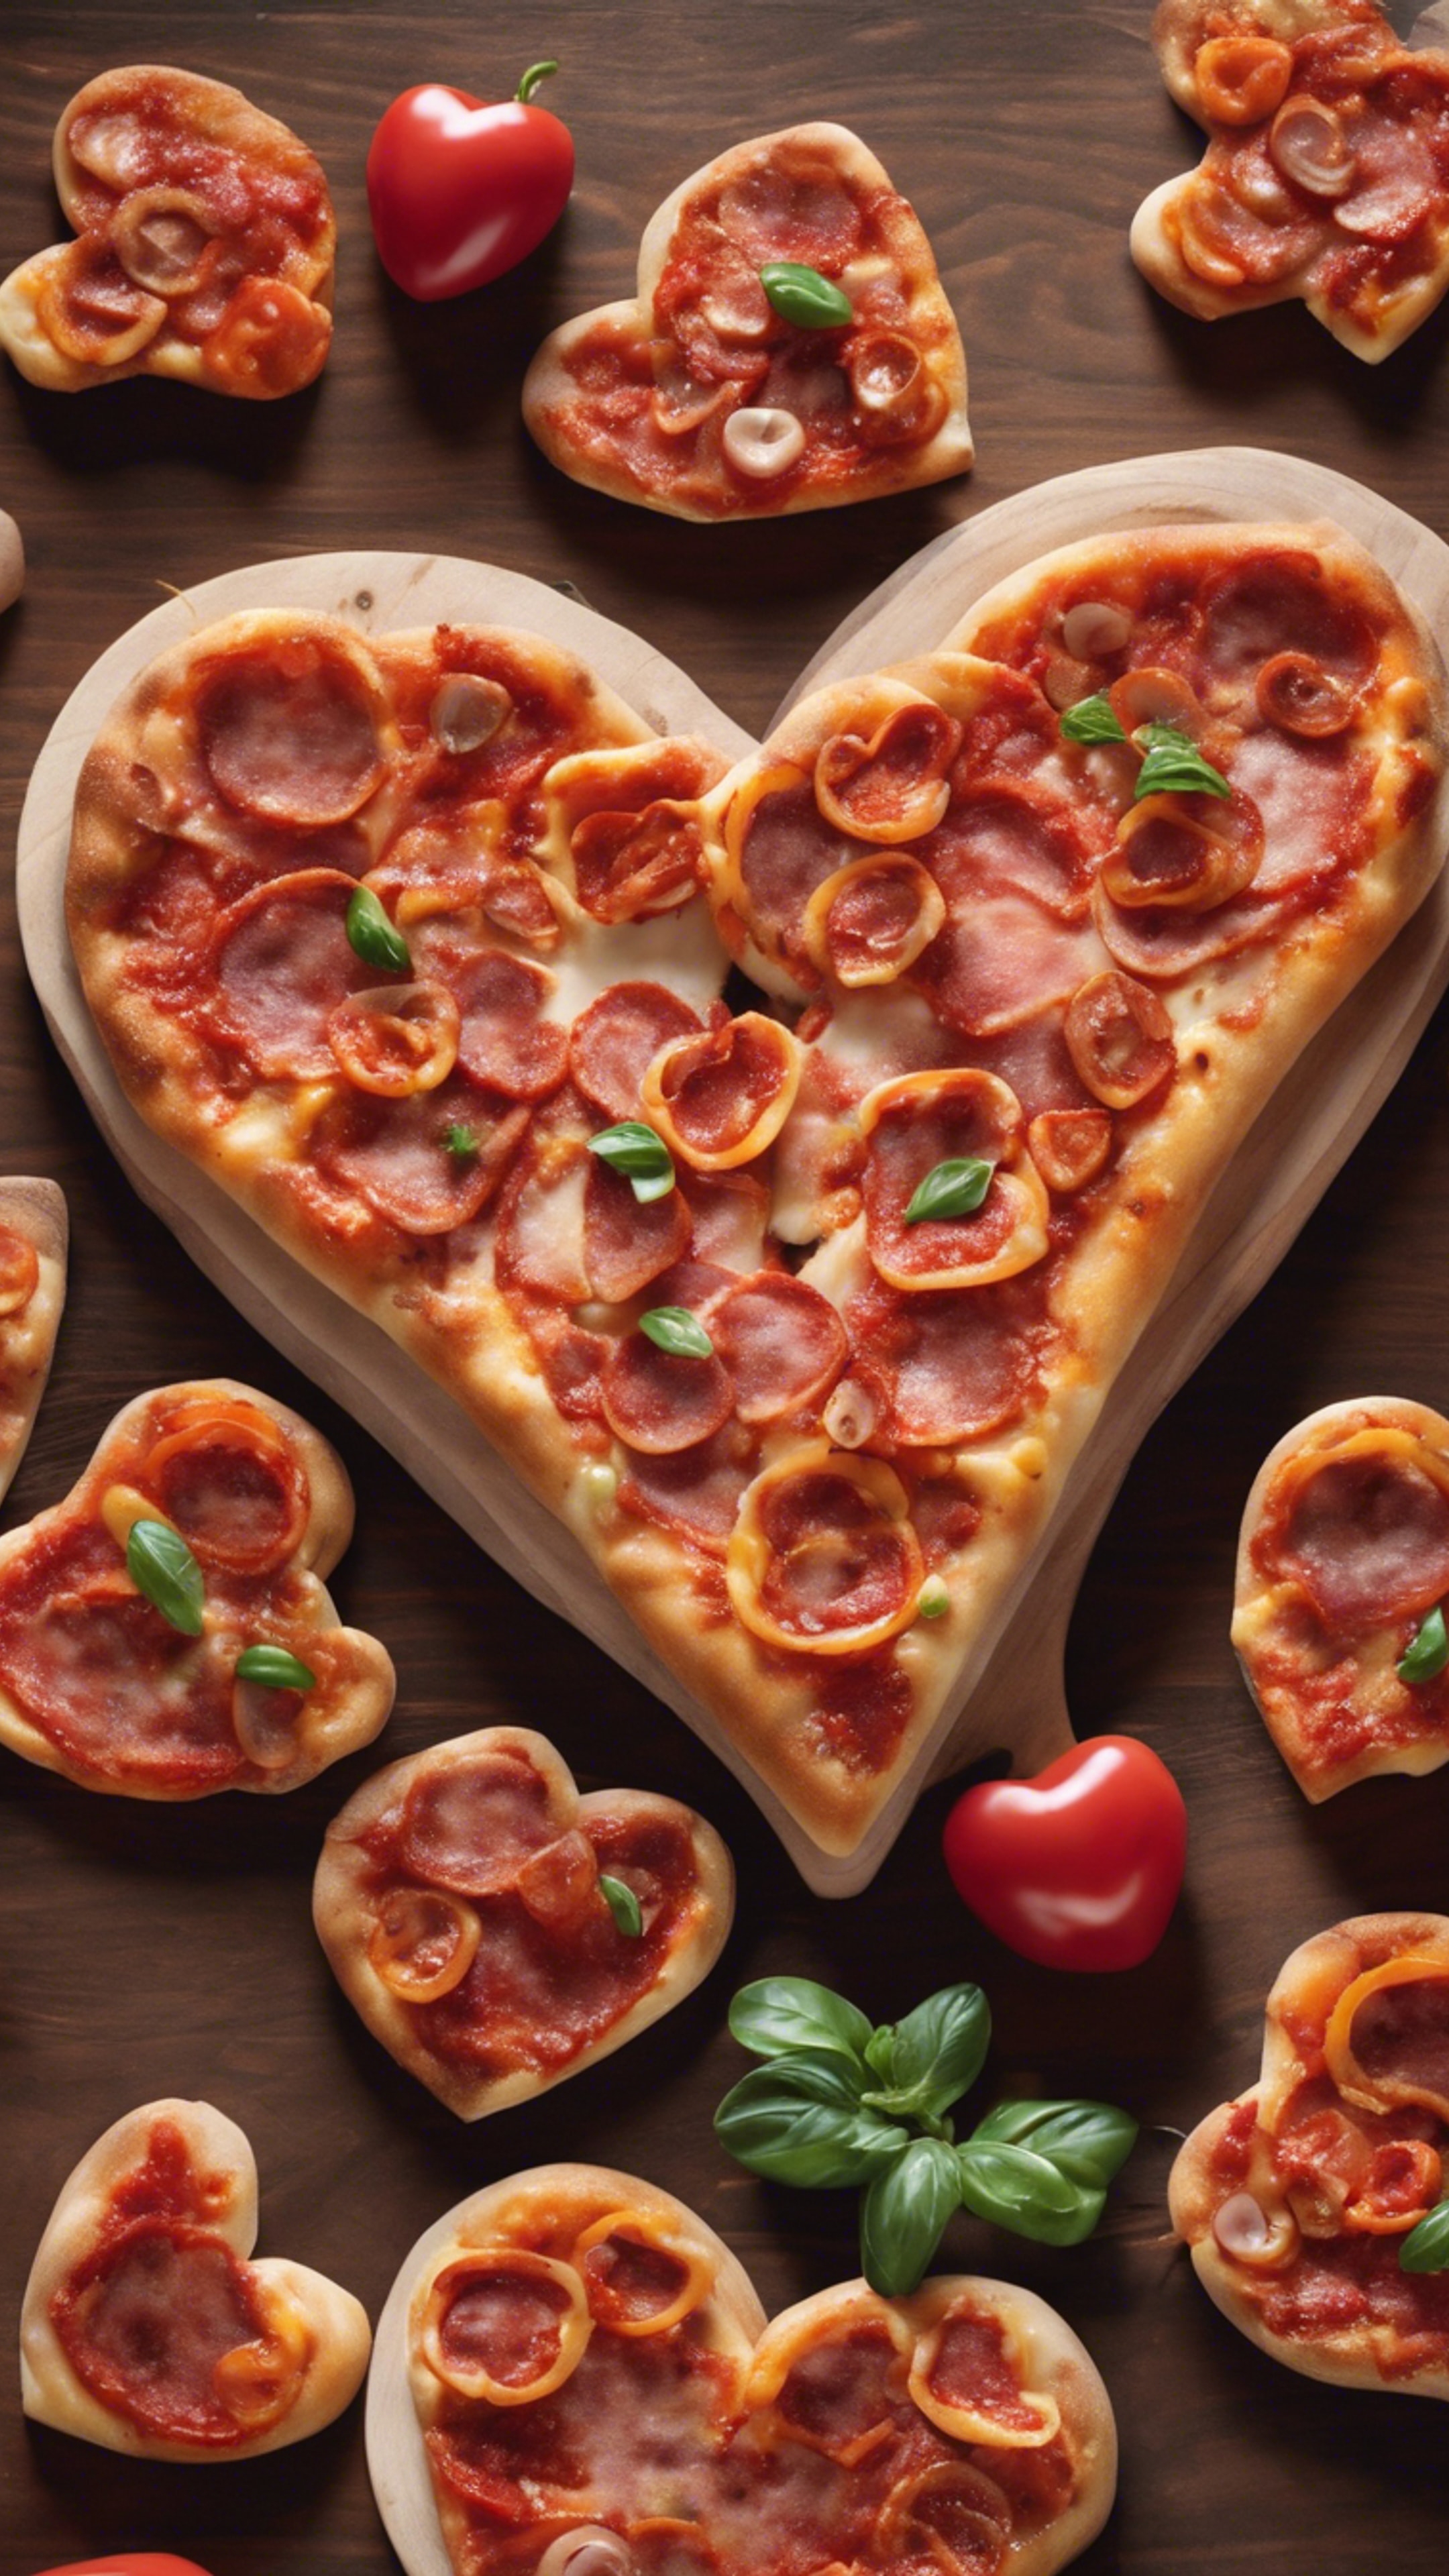 A heart-shaped pizza topped with pepperonis arranged in a smaller heart shape, the perfect cuisine for a romantic date. Sfondo[15df62b77c2f46a18143]